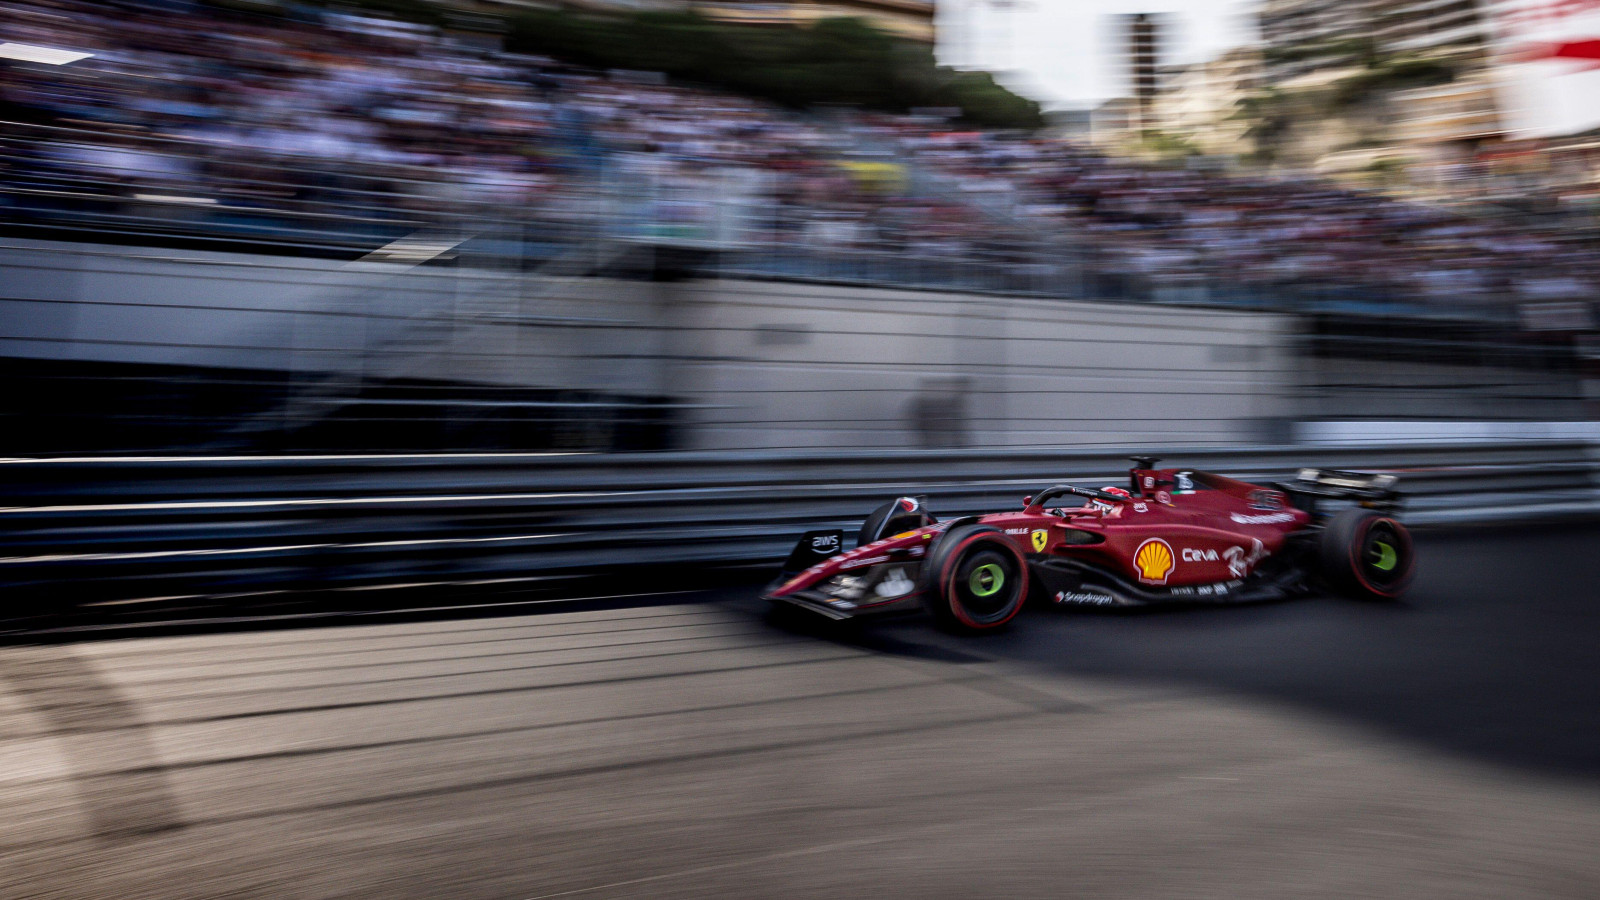 Ferrari's Charles Leclerc on track during practice for the Monaco Grand Prix. Monte Carlo, May 2022.